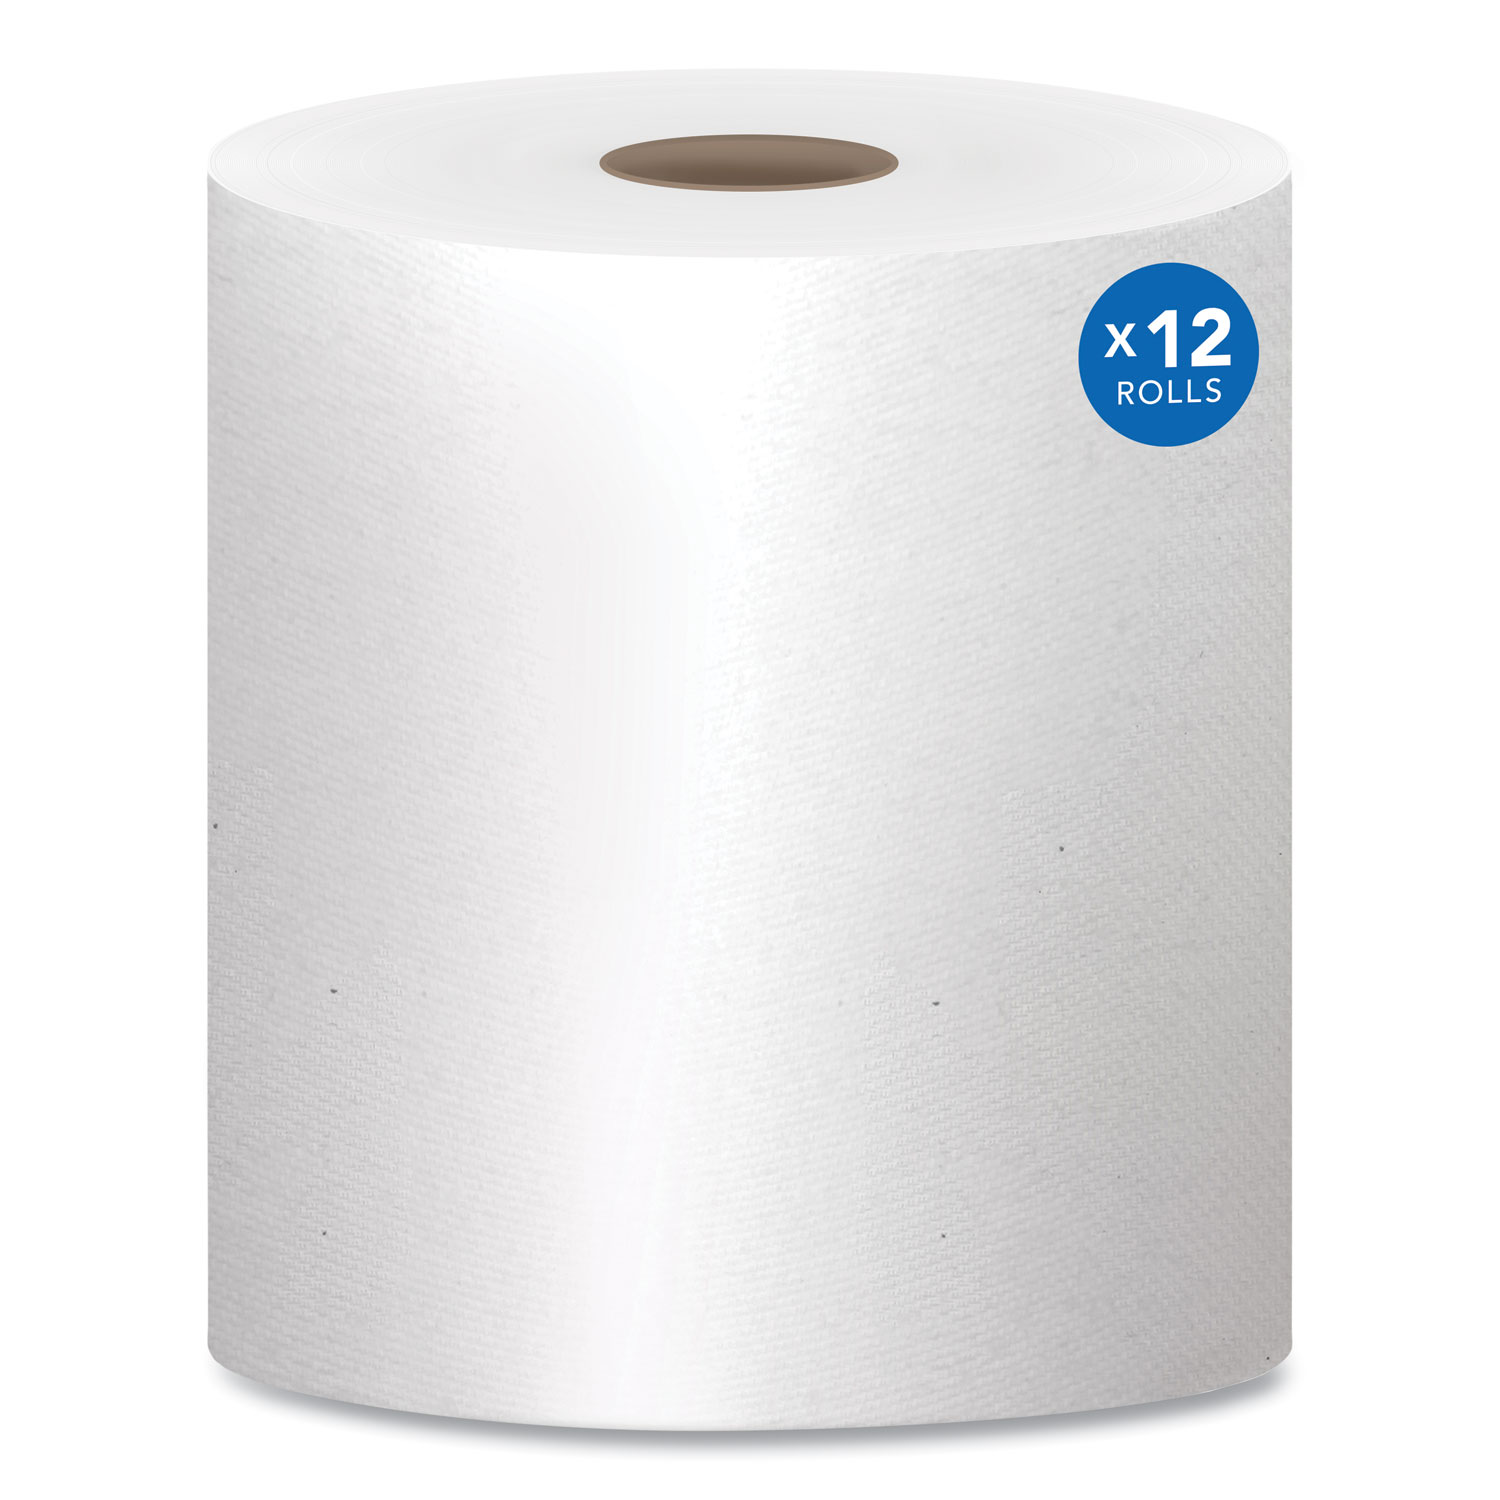 12.5 Inch Wide TableTop Roll Label Dispenser with 4 Core Holders